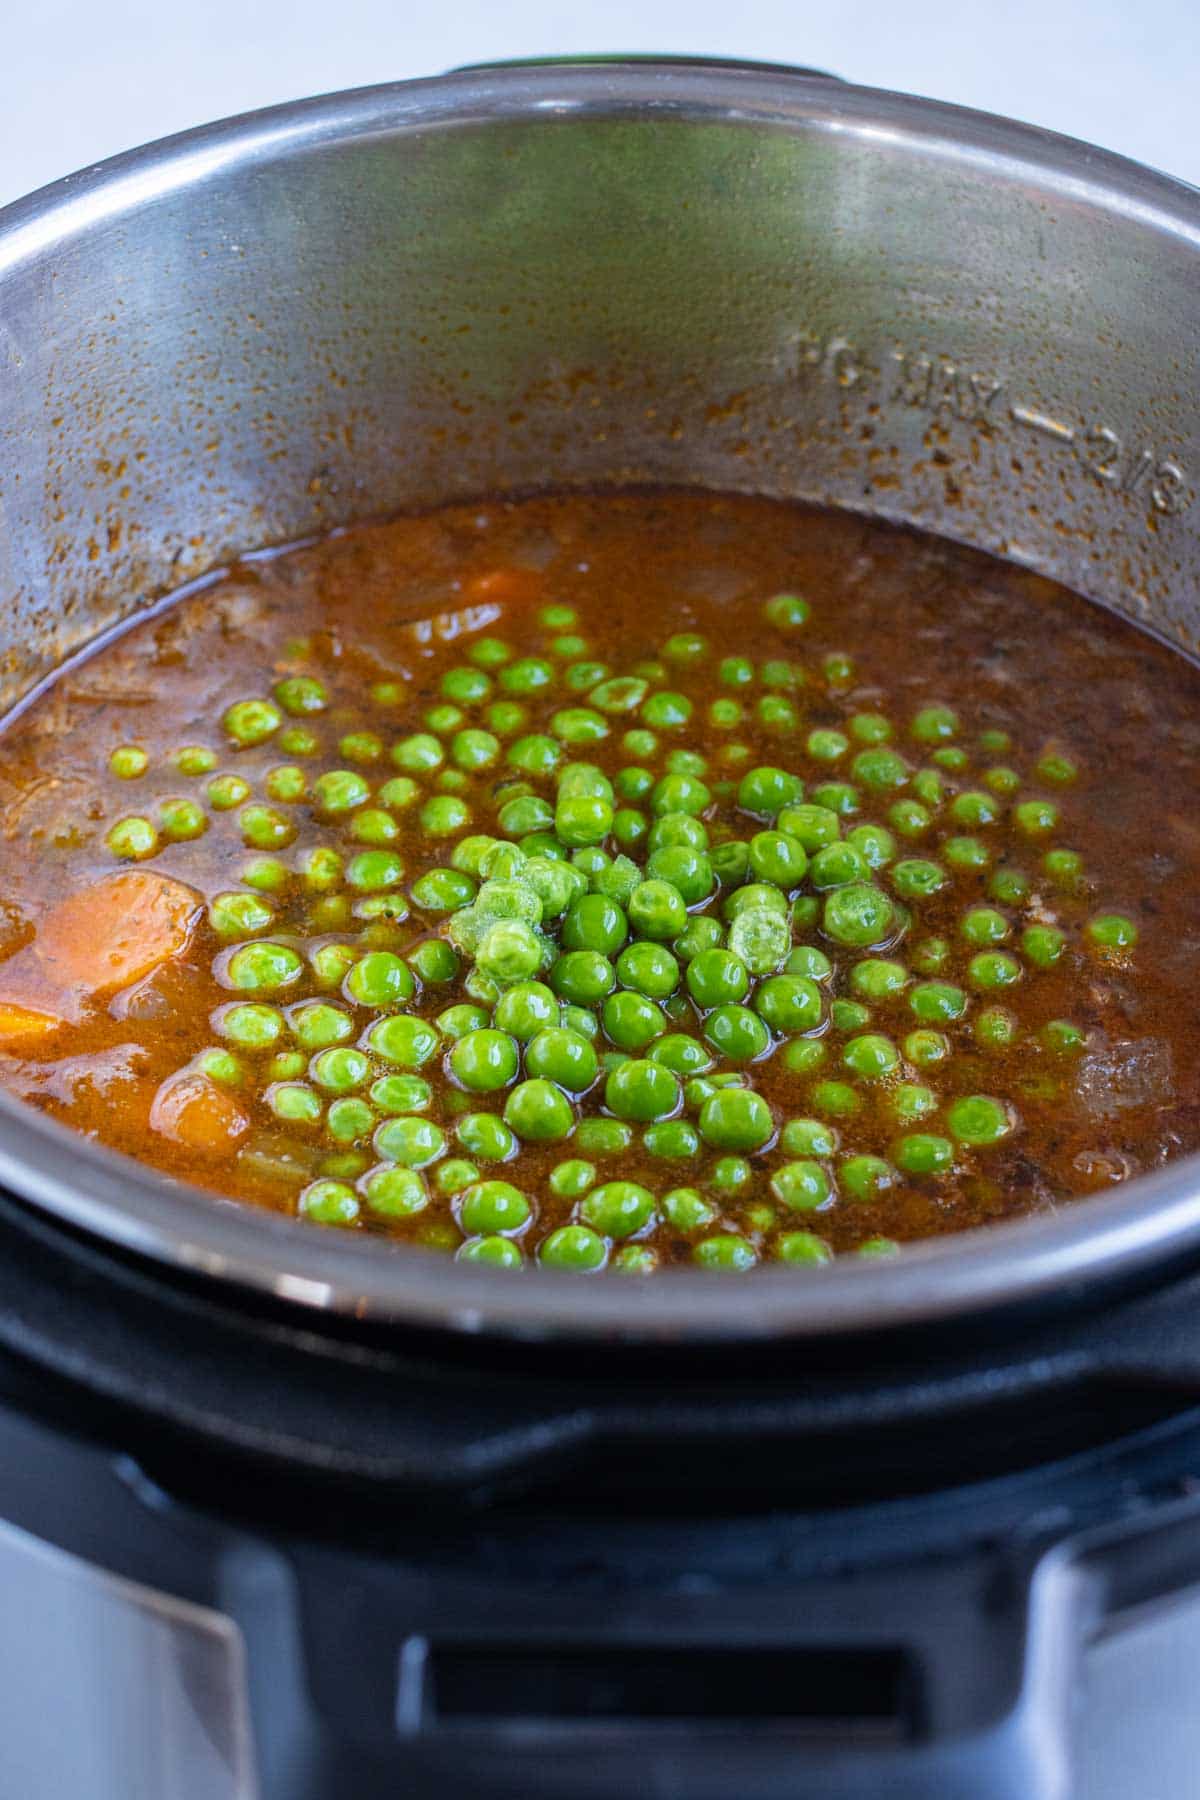 Peas are added last to the beef stew.